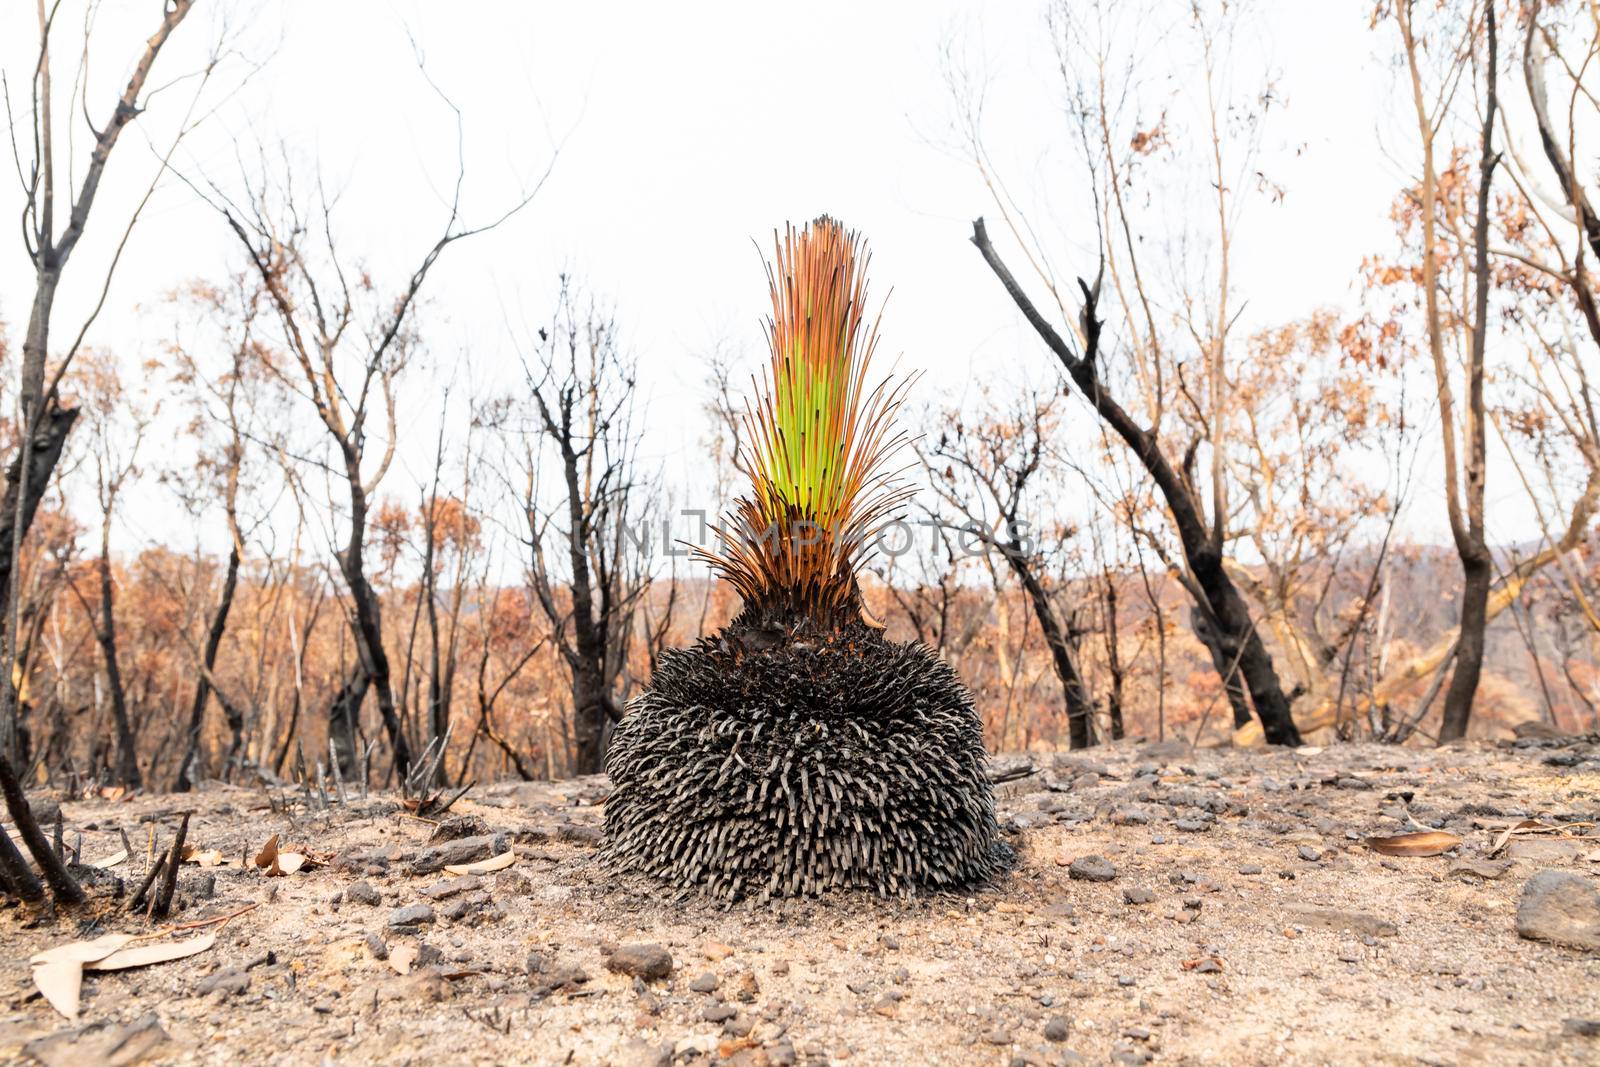 A green plant amongst severely burnt Eucalyptus trees after a bushfire in The Blue Mountains by WittkePhotos